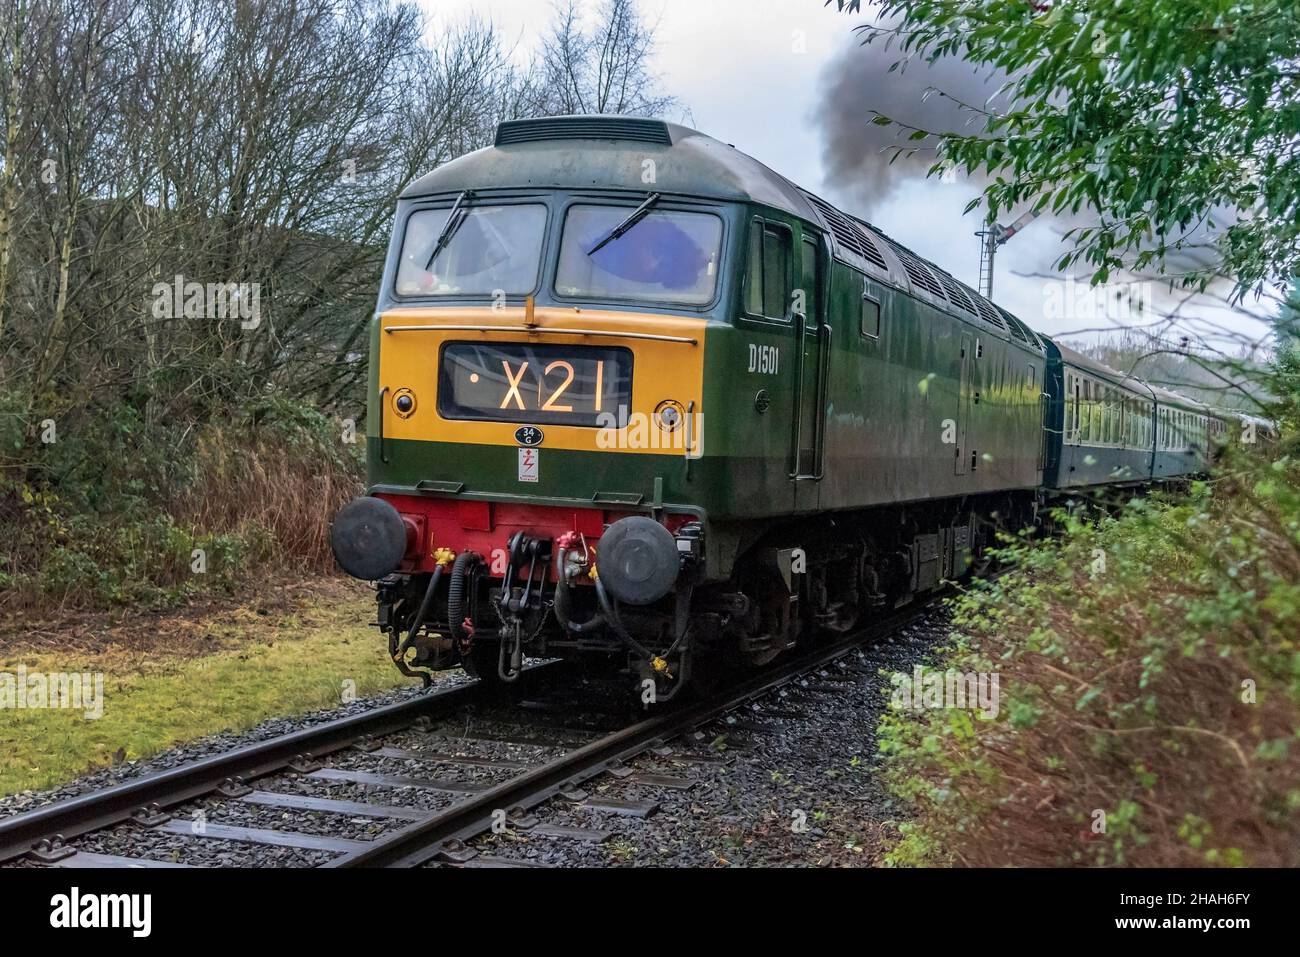 Heritage Class 47 diesel locomotive D1501.The loco is a member of the diesel fleet at the East Lancshire Railway. Stock Photo